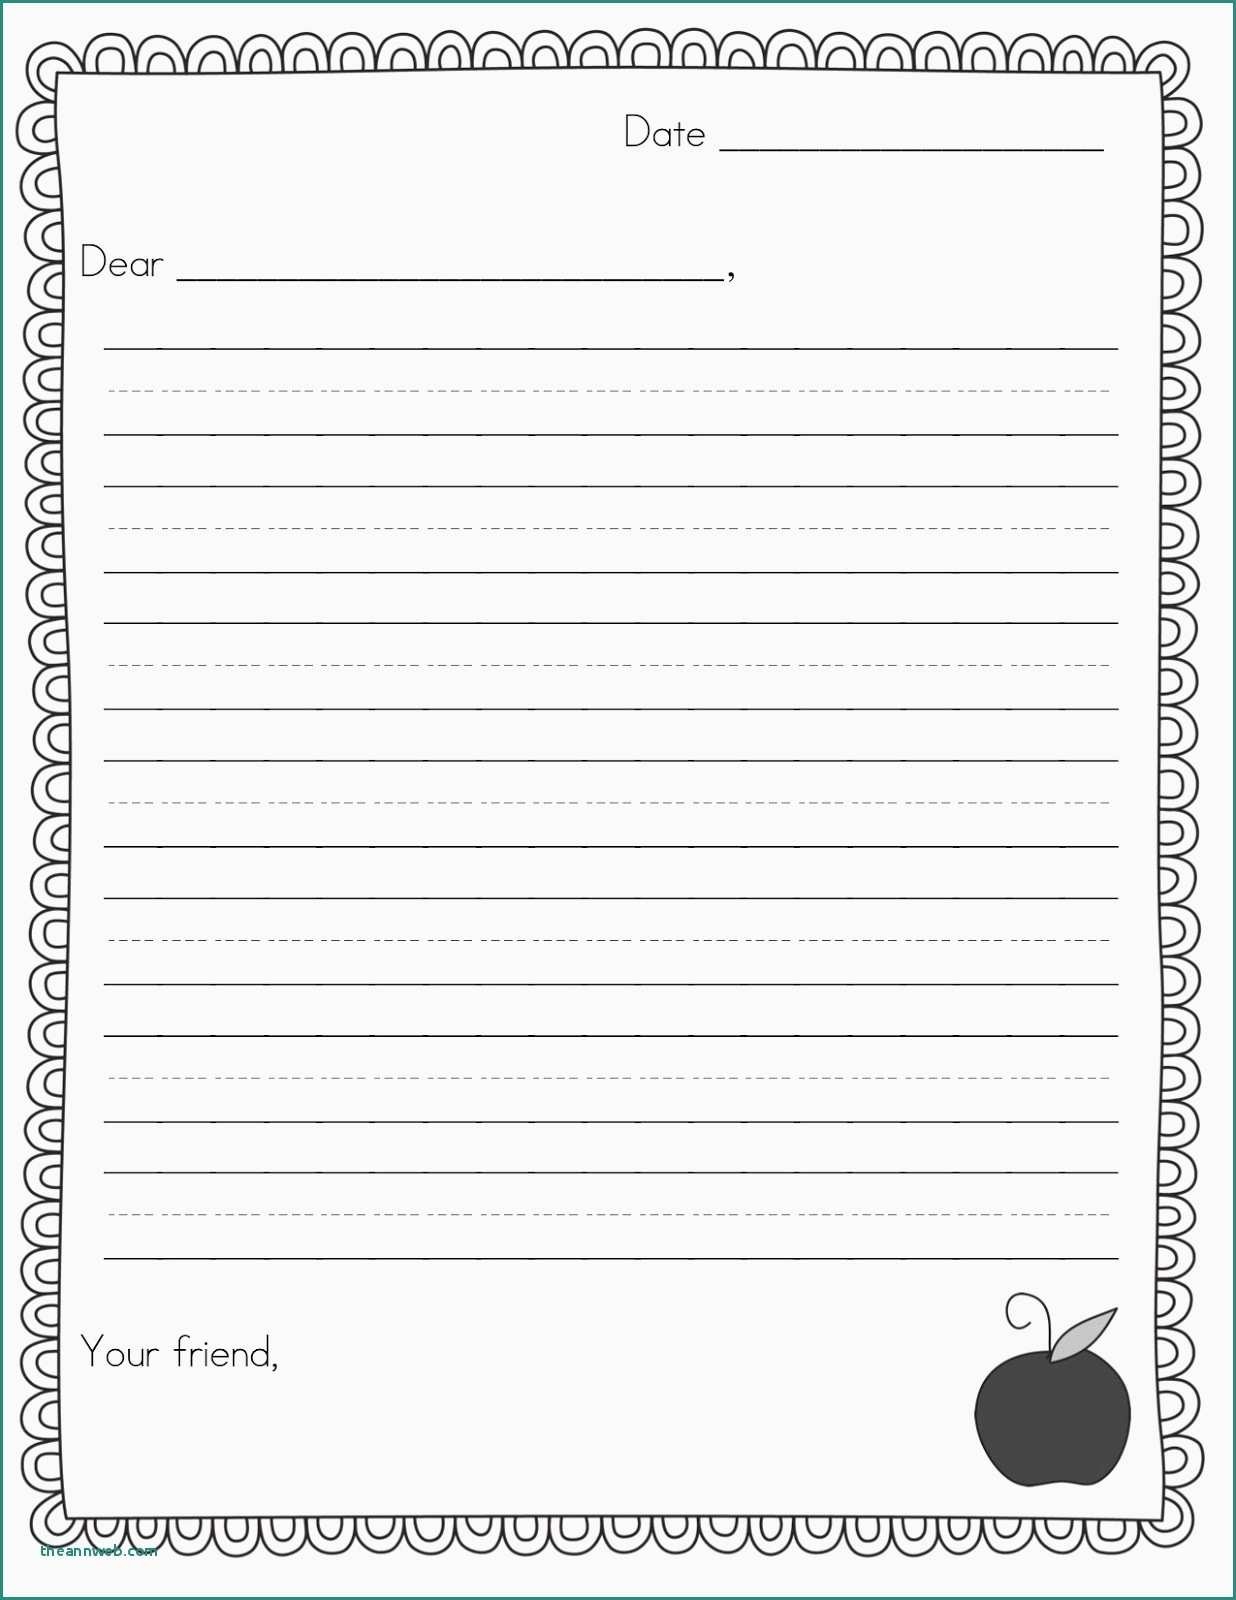 friendly-letter-template-2nd-grade-2-lessons-that-will-teach-you-all-you-need-to-know-about